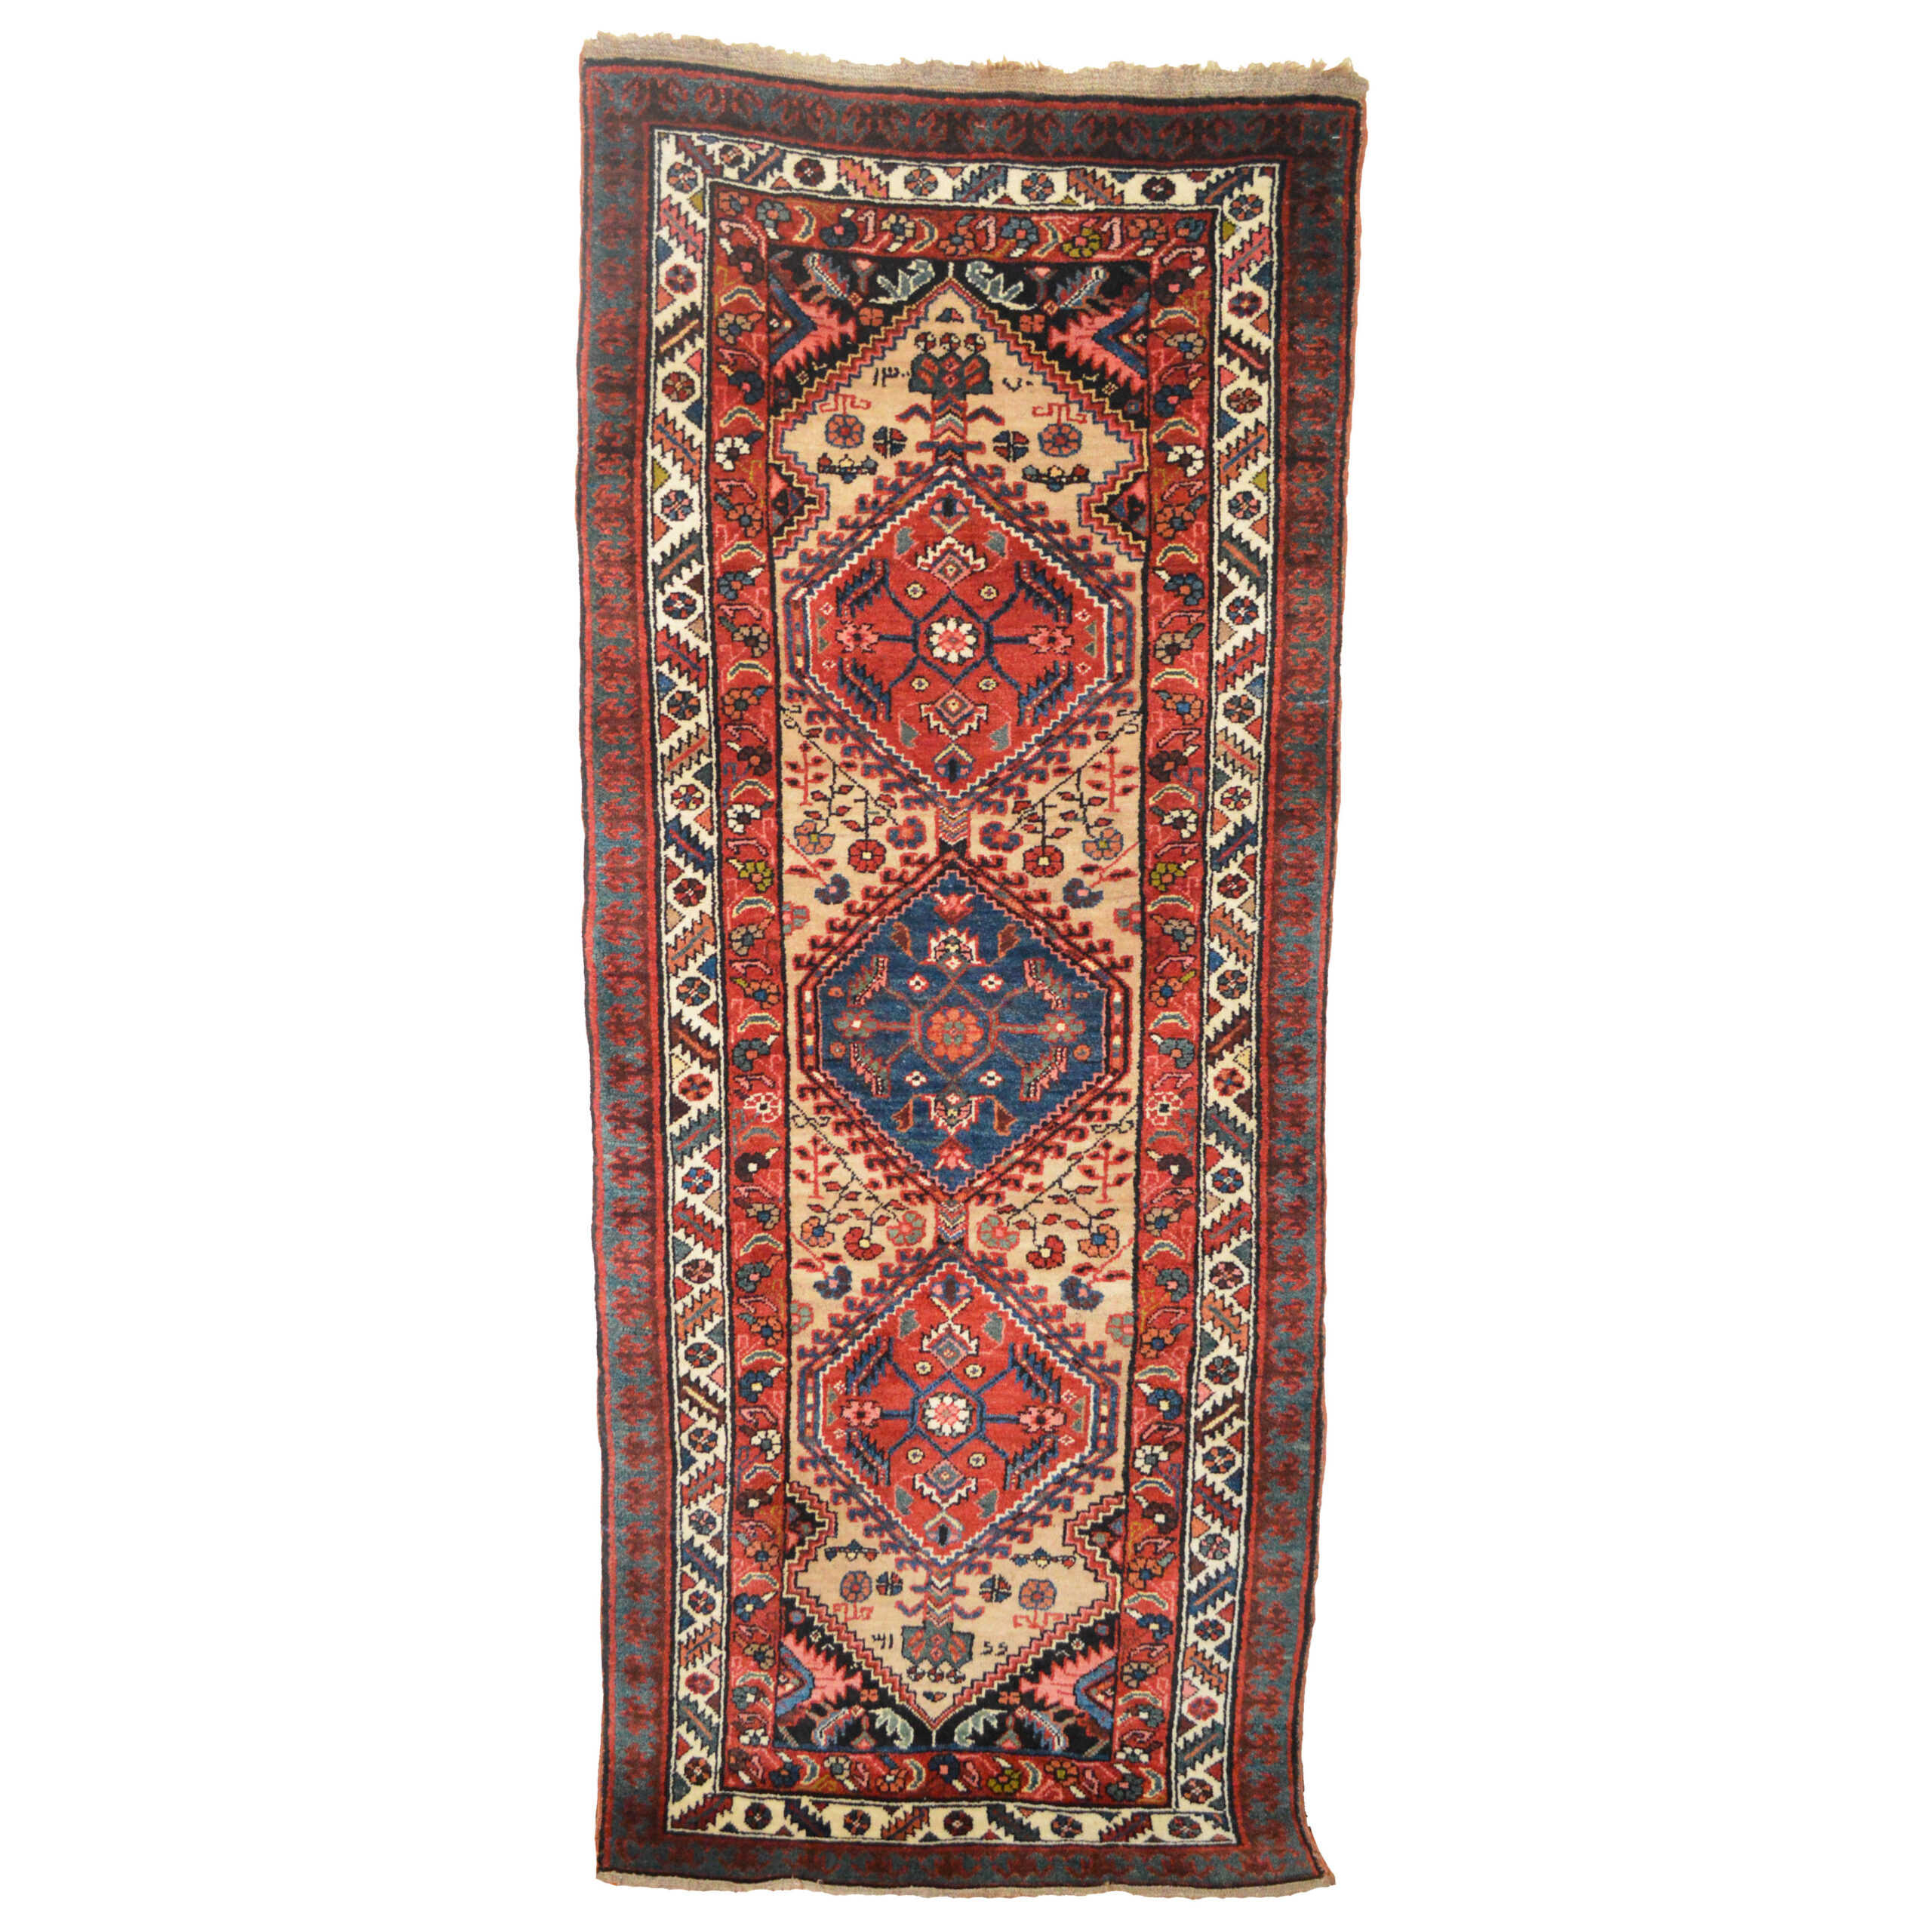 Douglas Stock Gallery, antique Oriental rugs Boston,MA area, Wellesley / Natick area, New England, an antique northwest Persian Serab rug with three medallions and stylized floral decoration on a light camel color field.